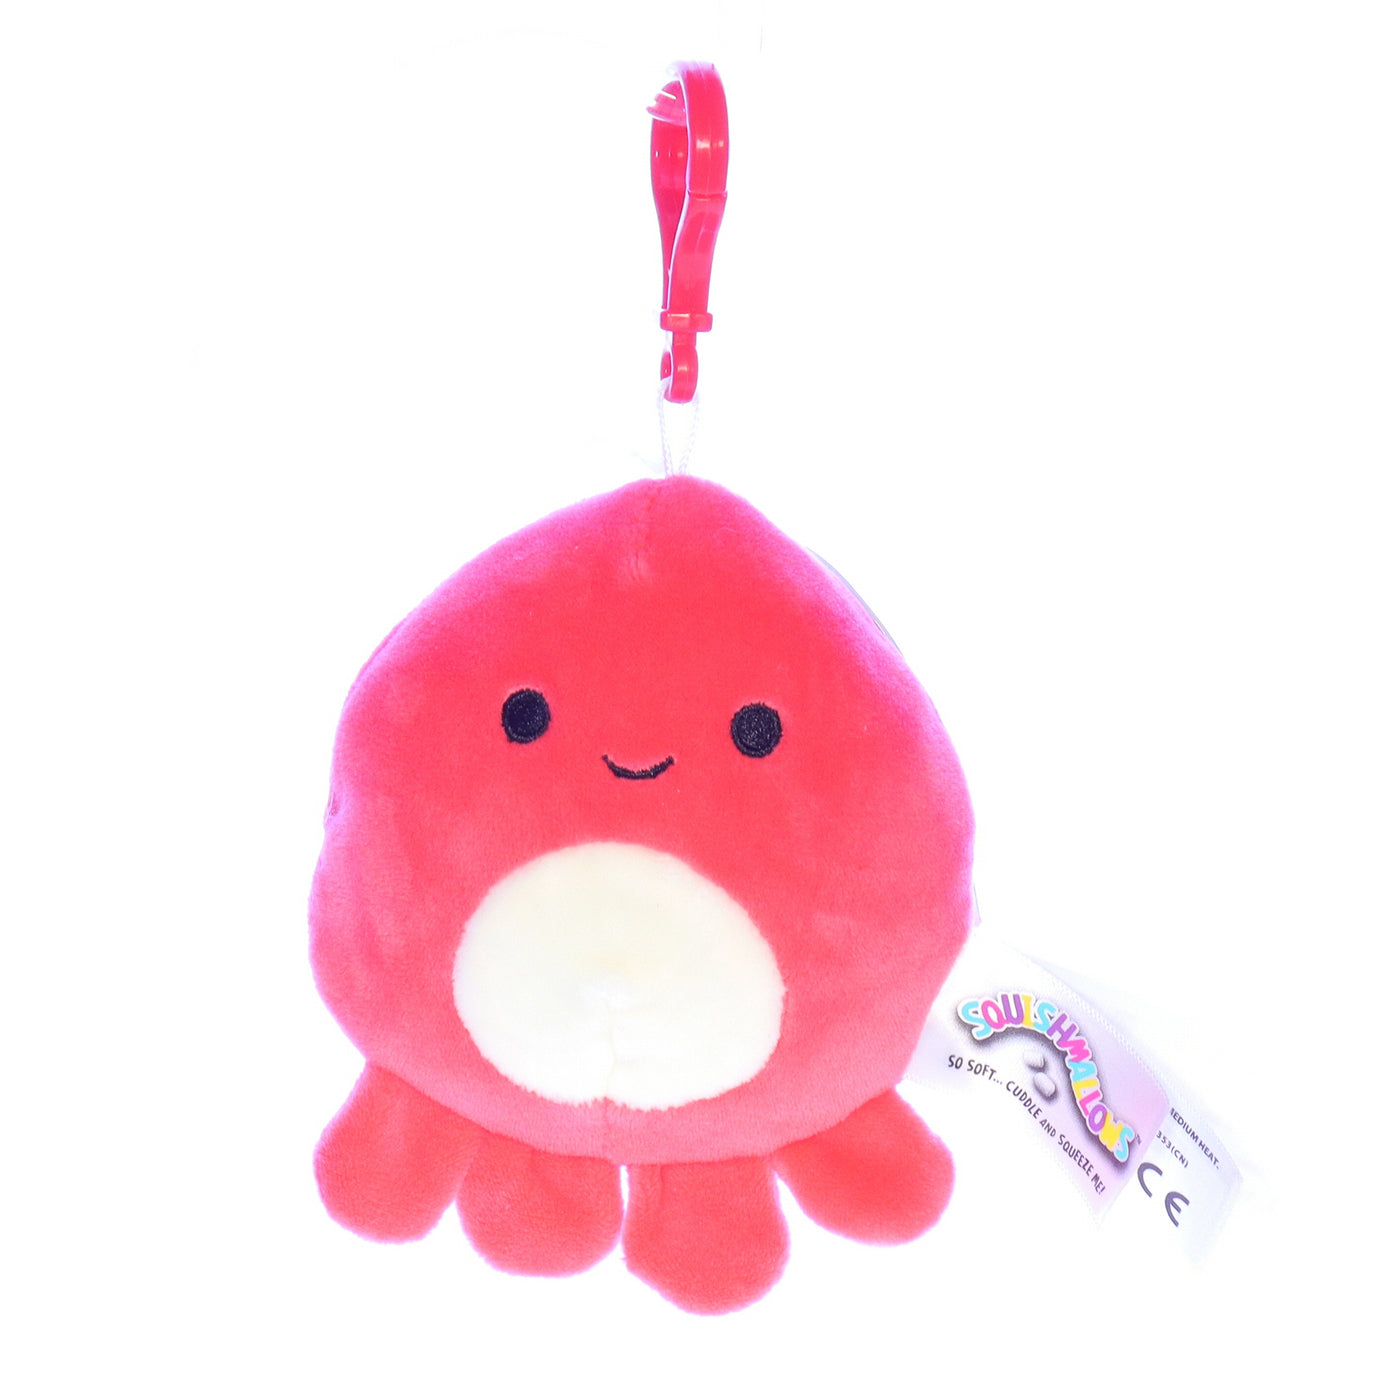 Squishmallows_Q044_Veronica_Keychain_Octopus_Stuffed_Animal_2019 Front View